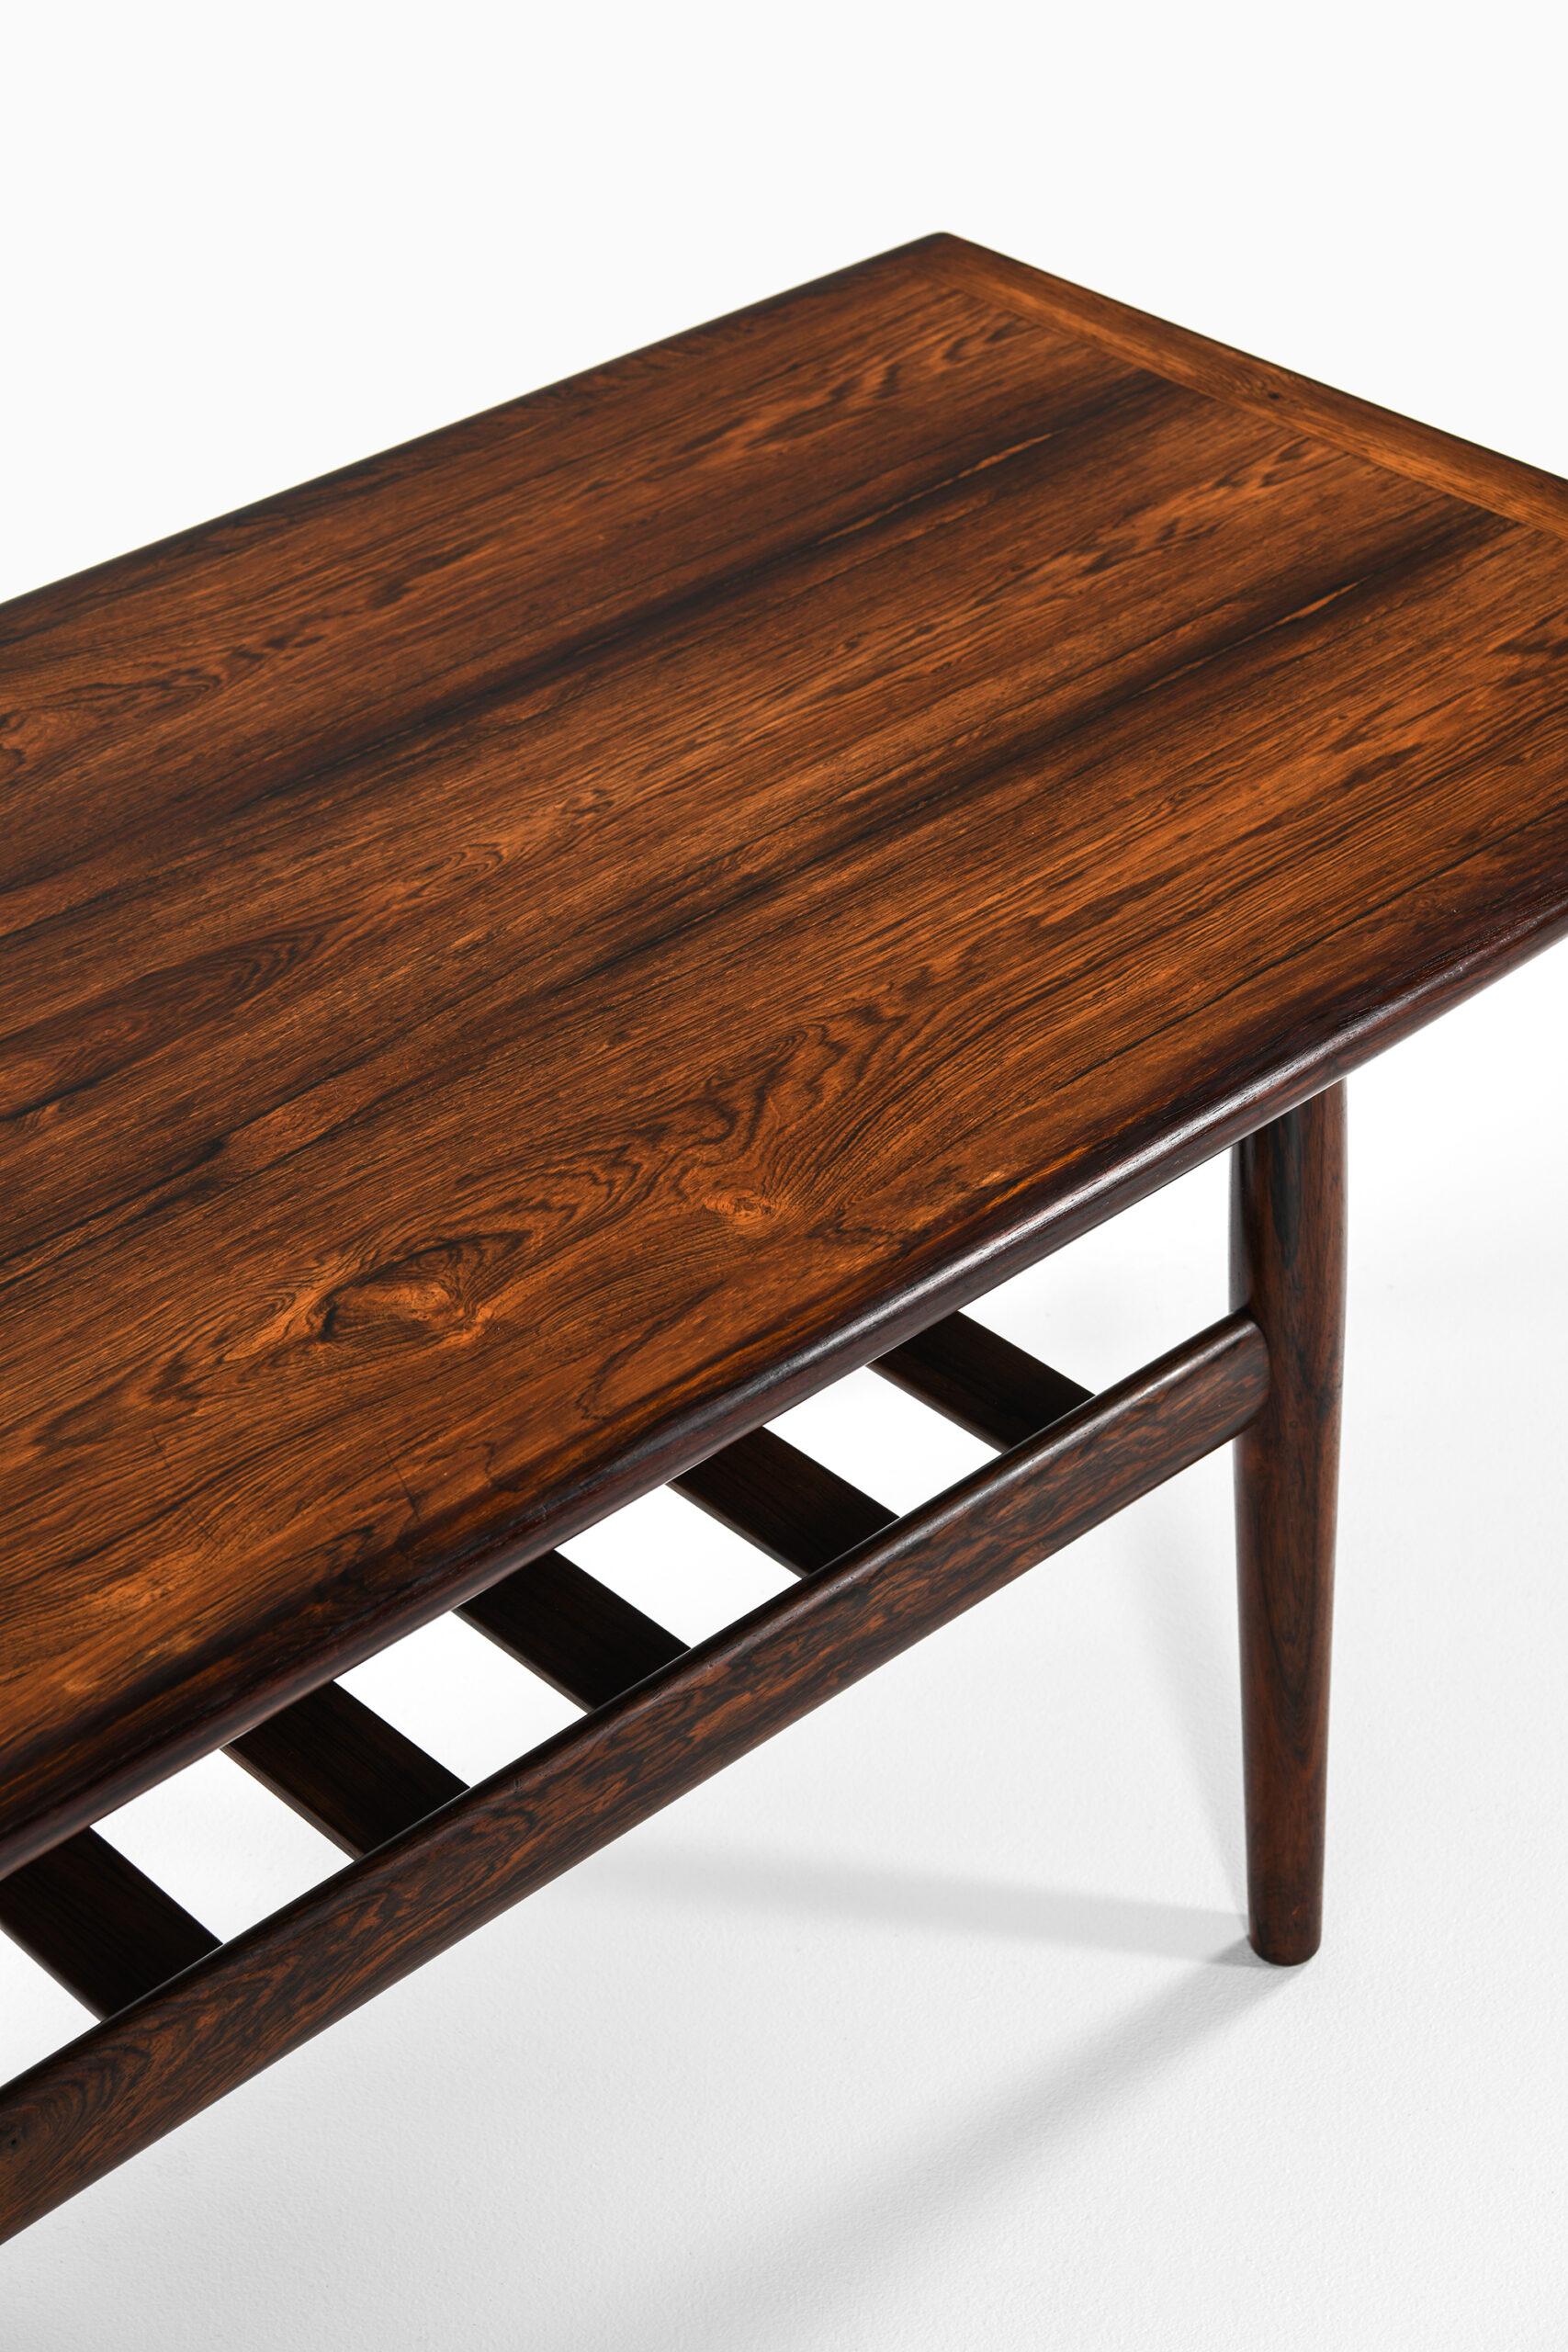 Rare coffee table designed by Grete Jalk. Produced by Glostrup Møbelfabrik in Denmark.